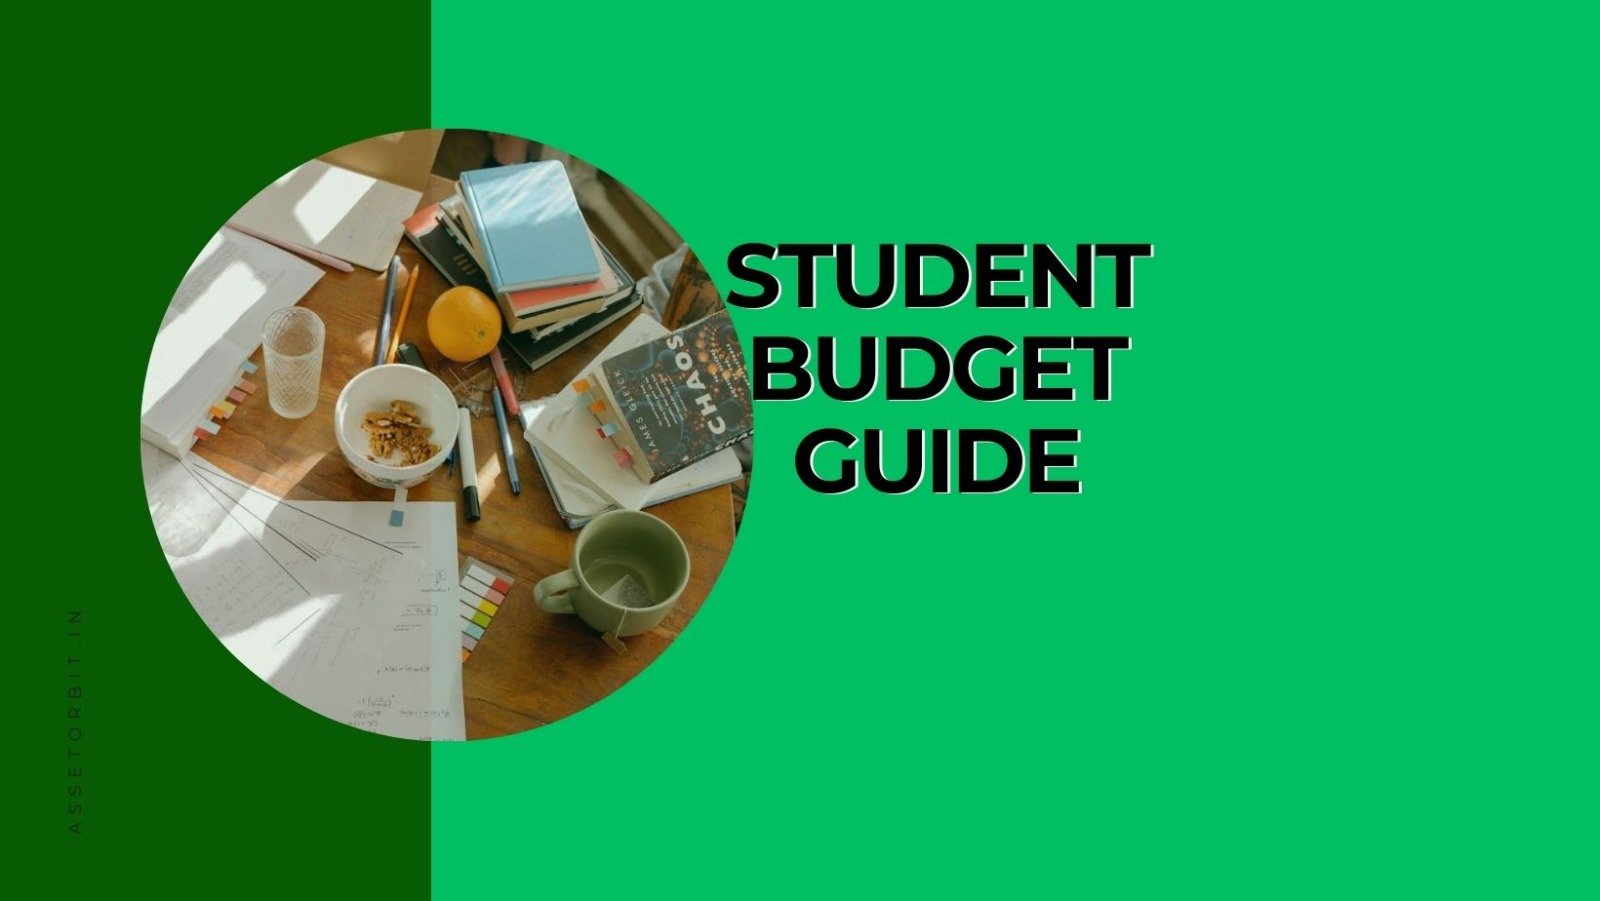 Create a simple student budget